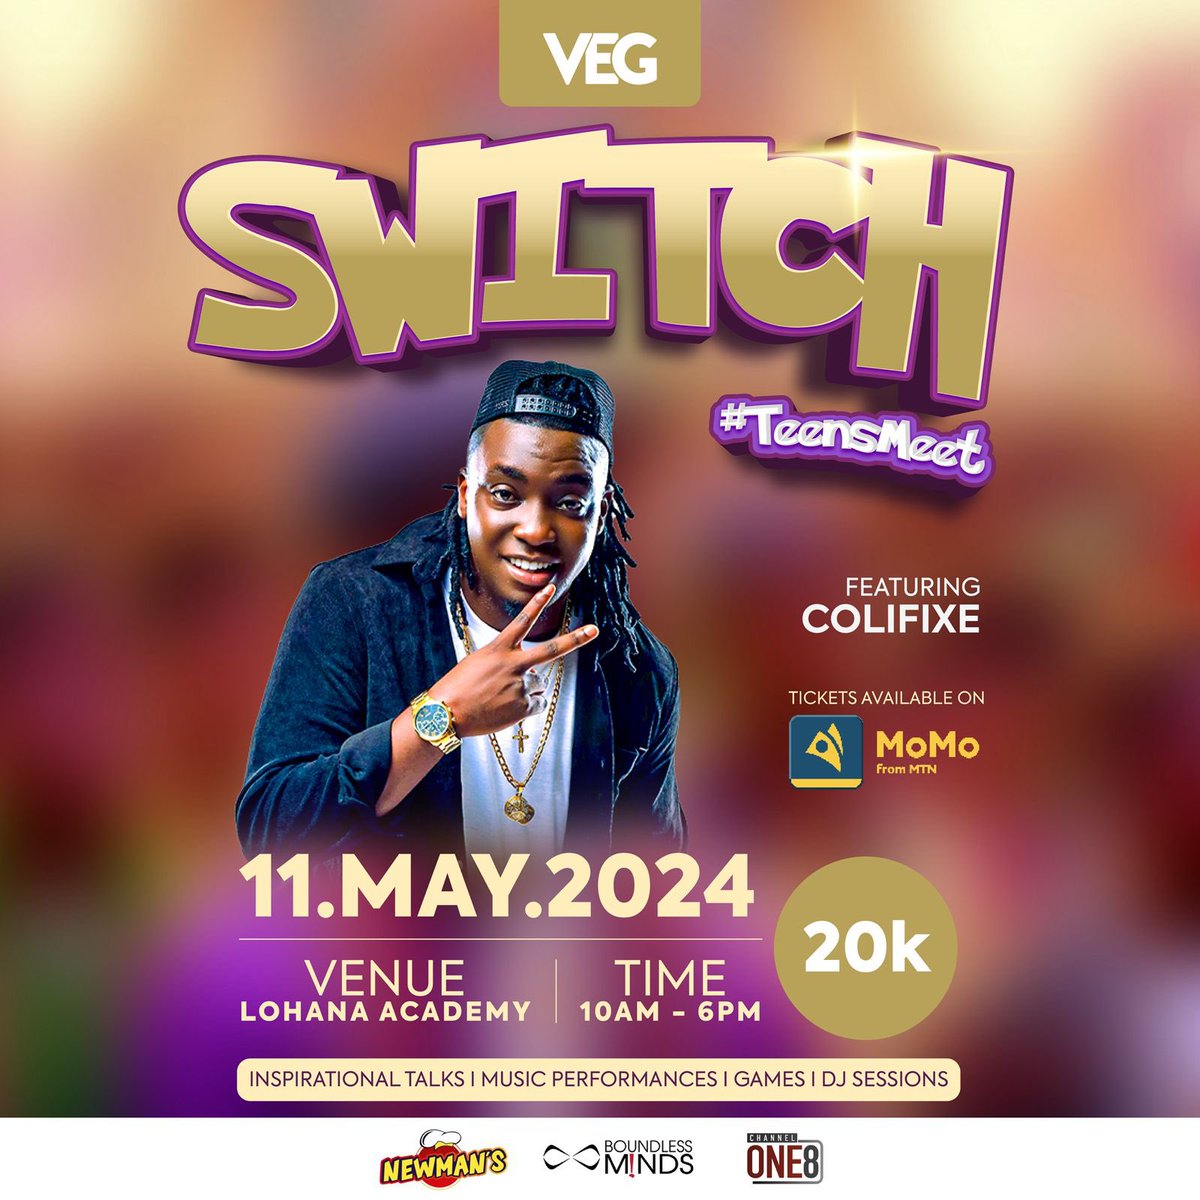 . Colifixe the urban gospel artist will be gracing the #Switch2024 stage with his energetic performances. Get tickets for your teens at only 20k using #MTNMoMo #TeensMeet